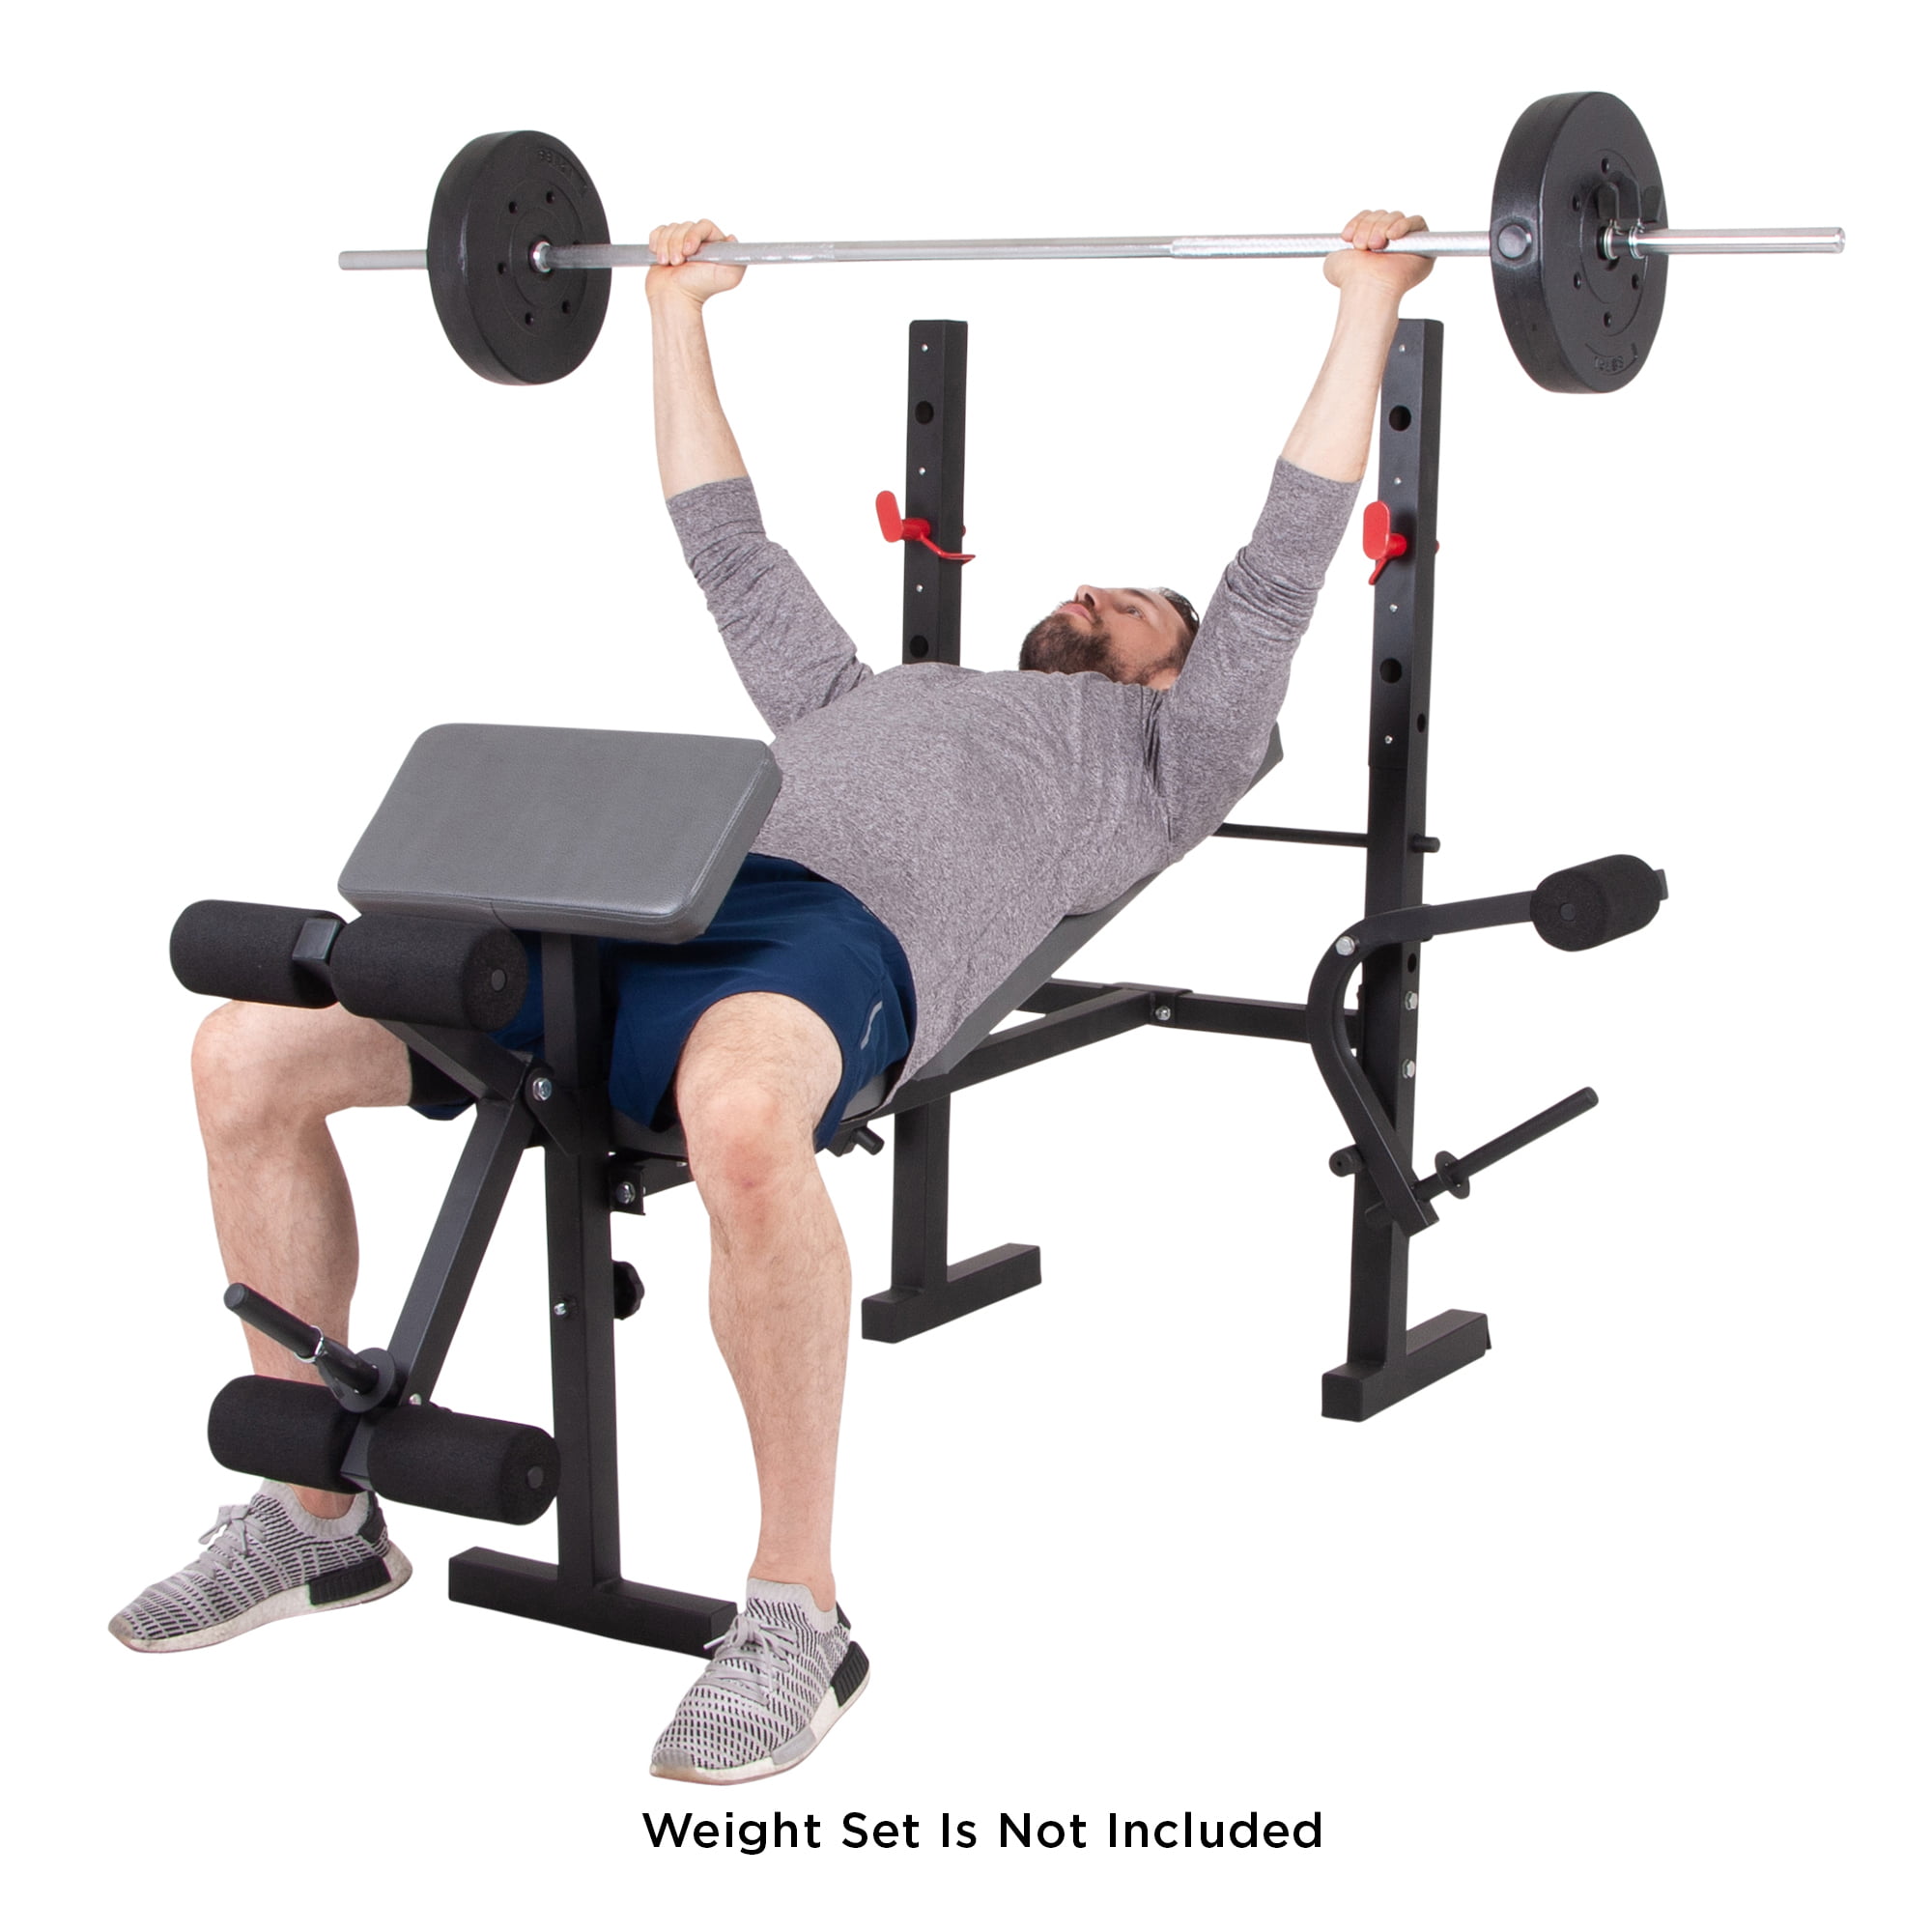 Weight Bench with Bar and Weights 100 lb Lift Set Weight Lifting Exercise Press 